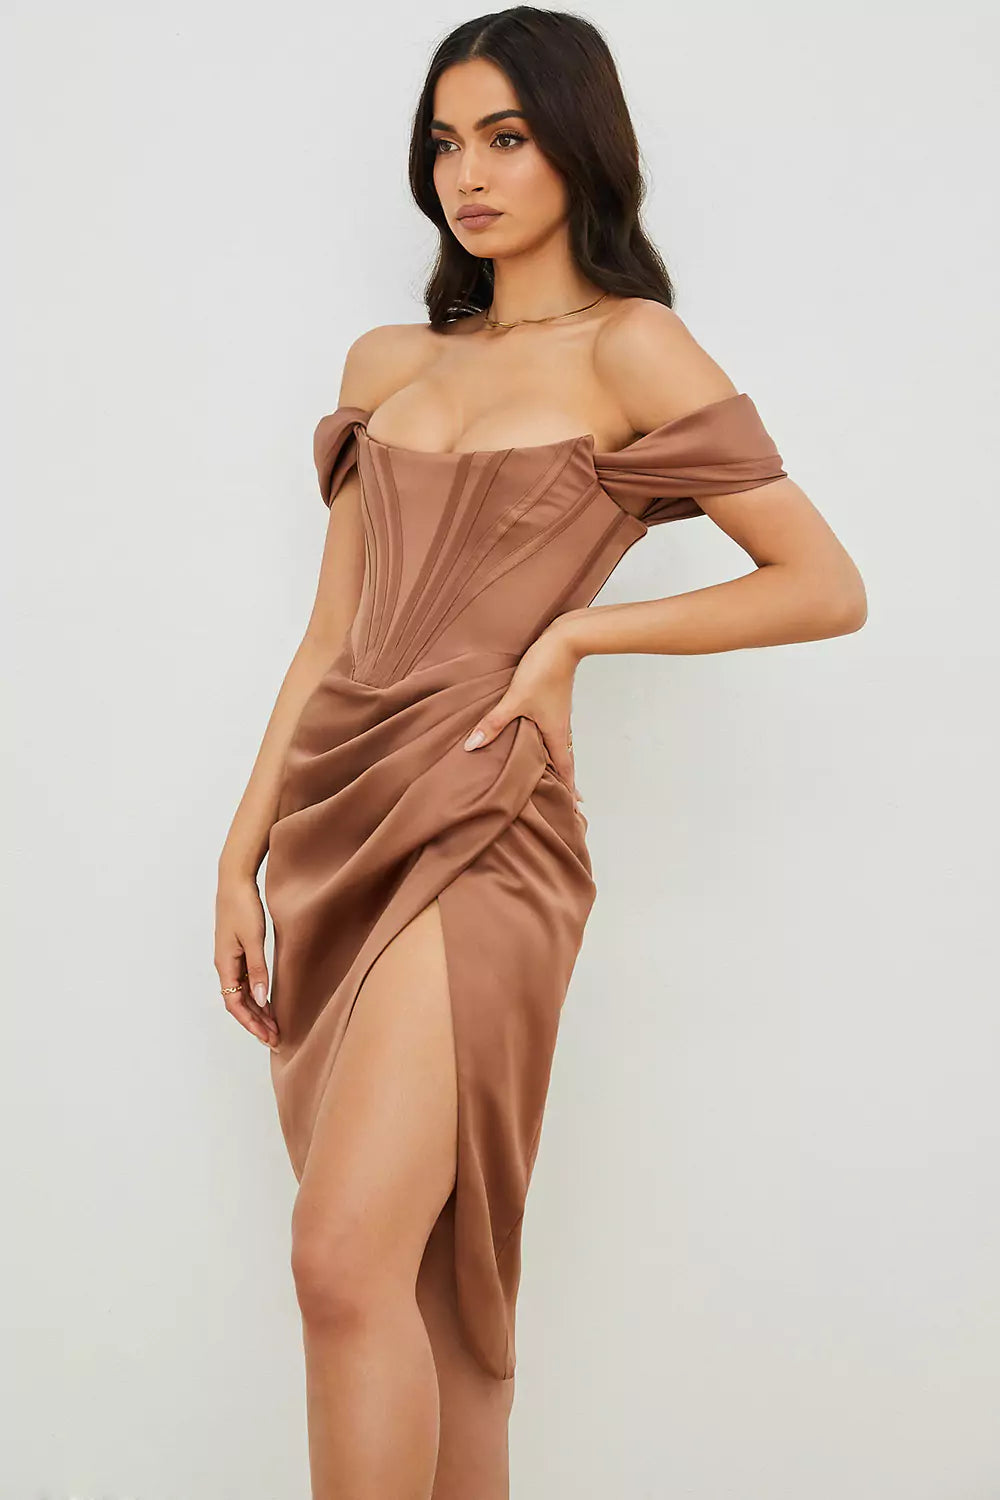 The model is wearing a brown satin dress with a slit.